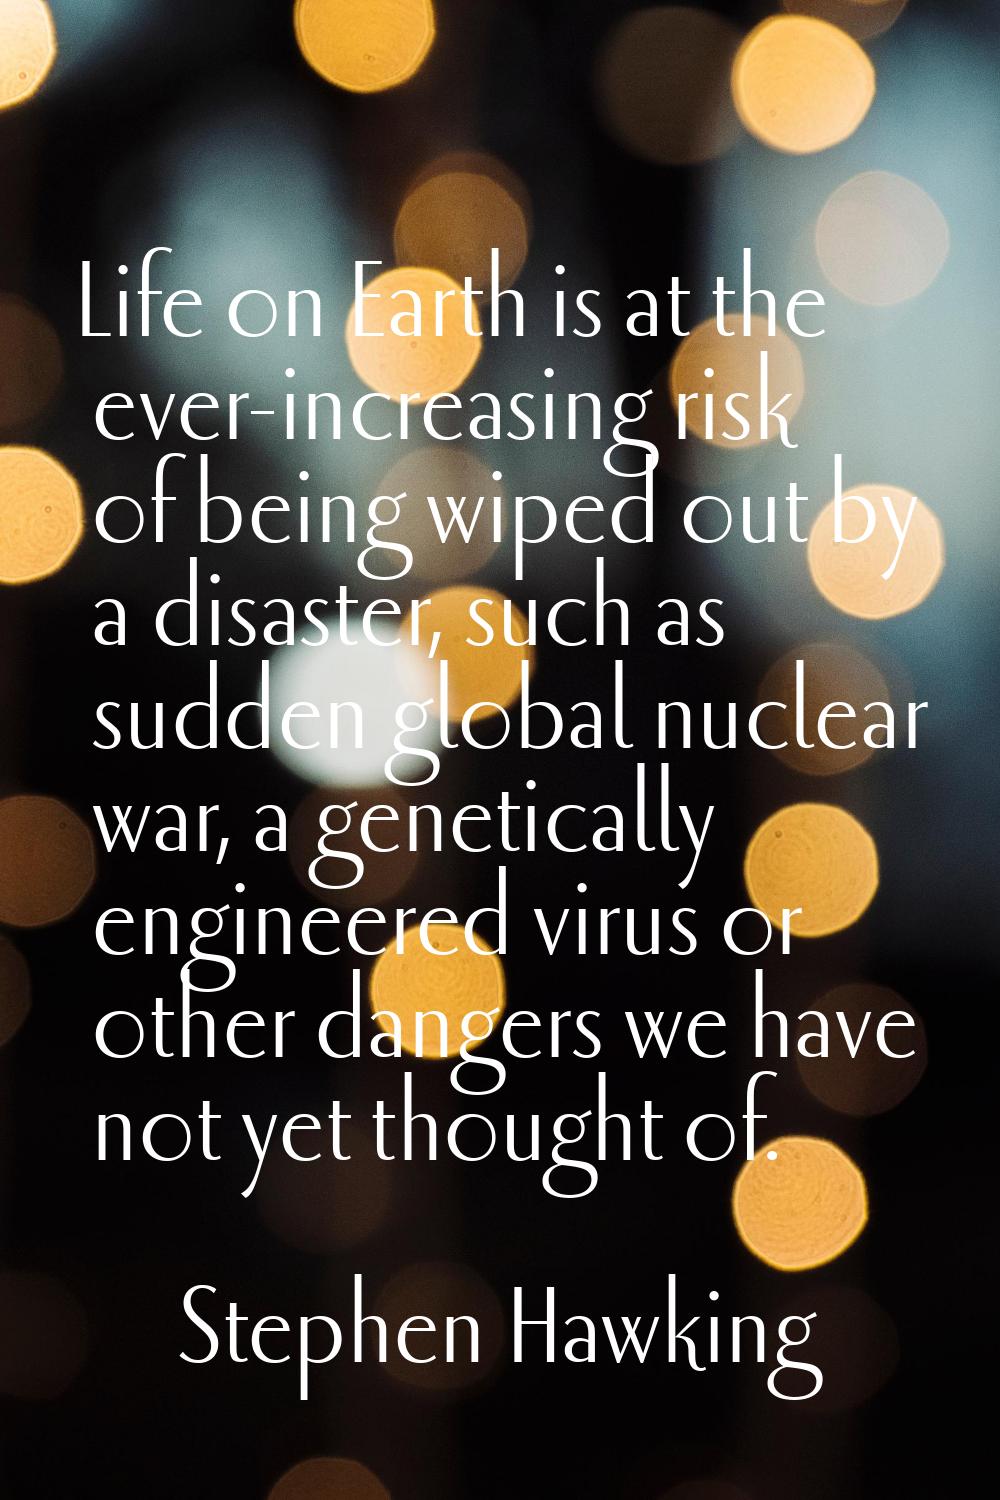 Life on Earth is at the ever-increasing risk of being wiped out by a disaster, such as sudden globa